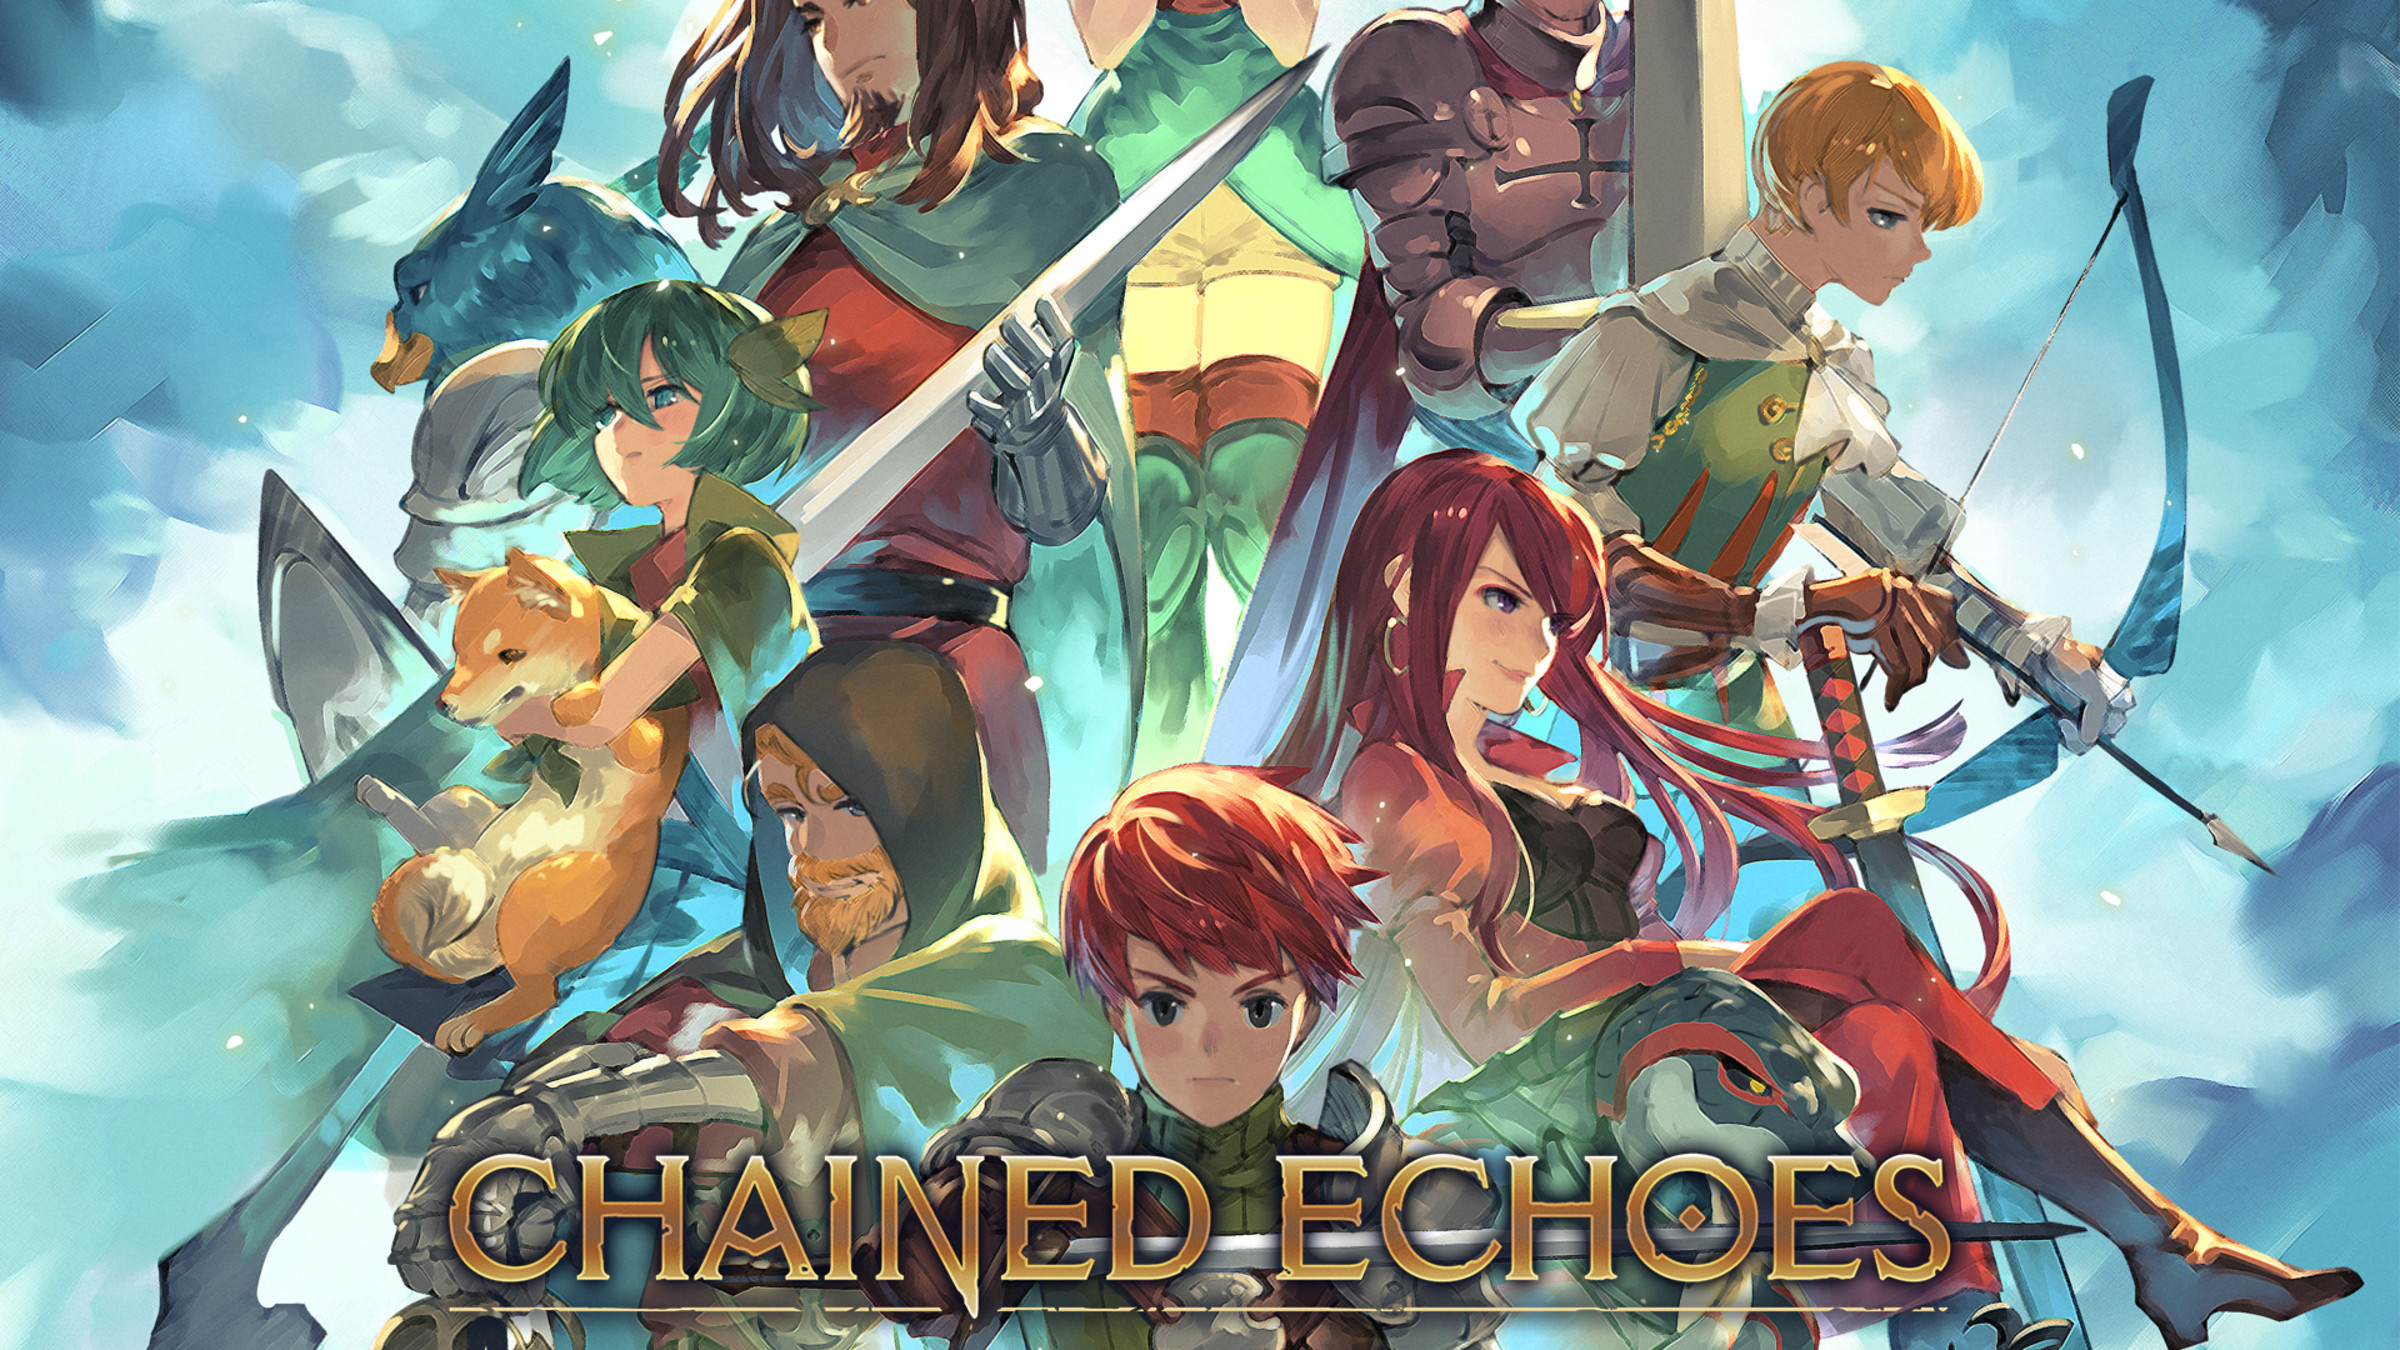 https://assets.nintendo.com/image/upload/c_fill,w_1200/q_auto:best/f_auto/dpr_2.0/ncom/en_US/games/switch/c/chained-echoes-switch/